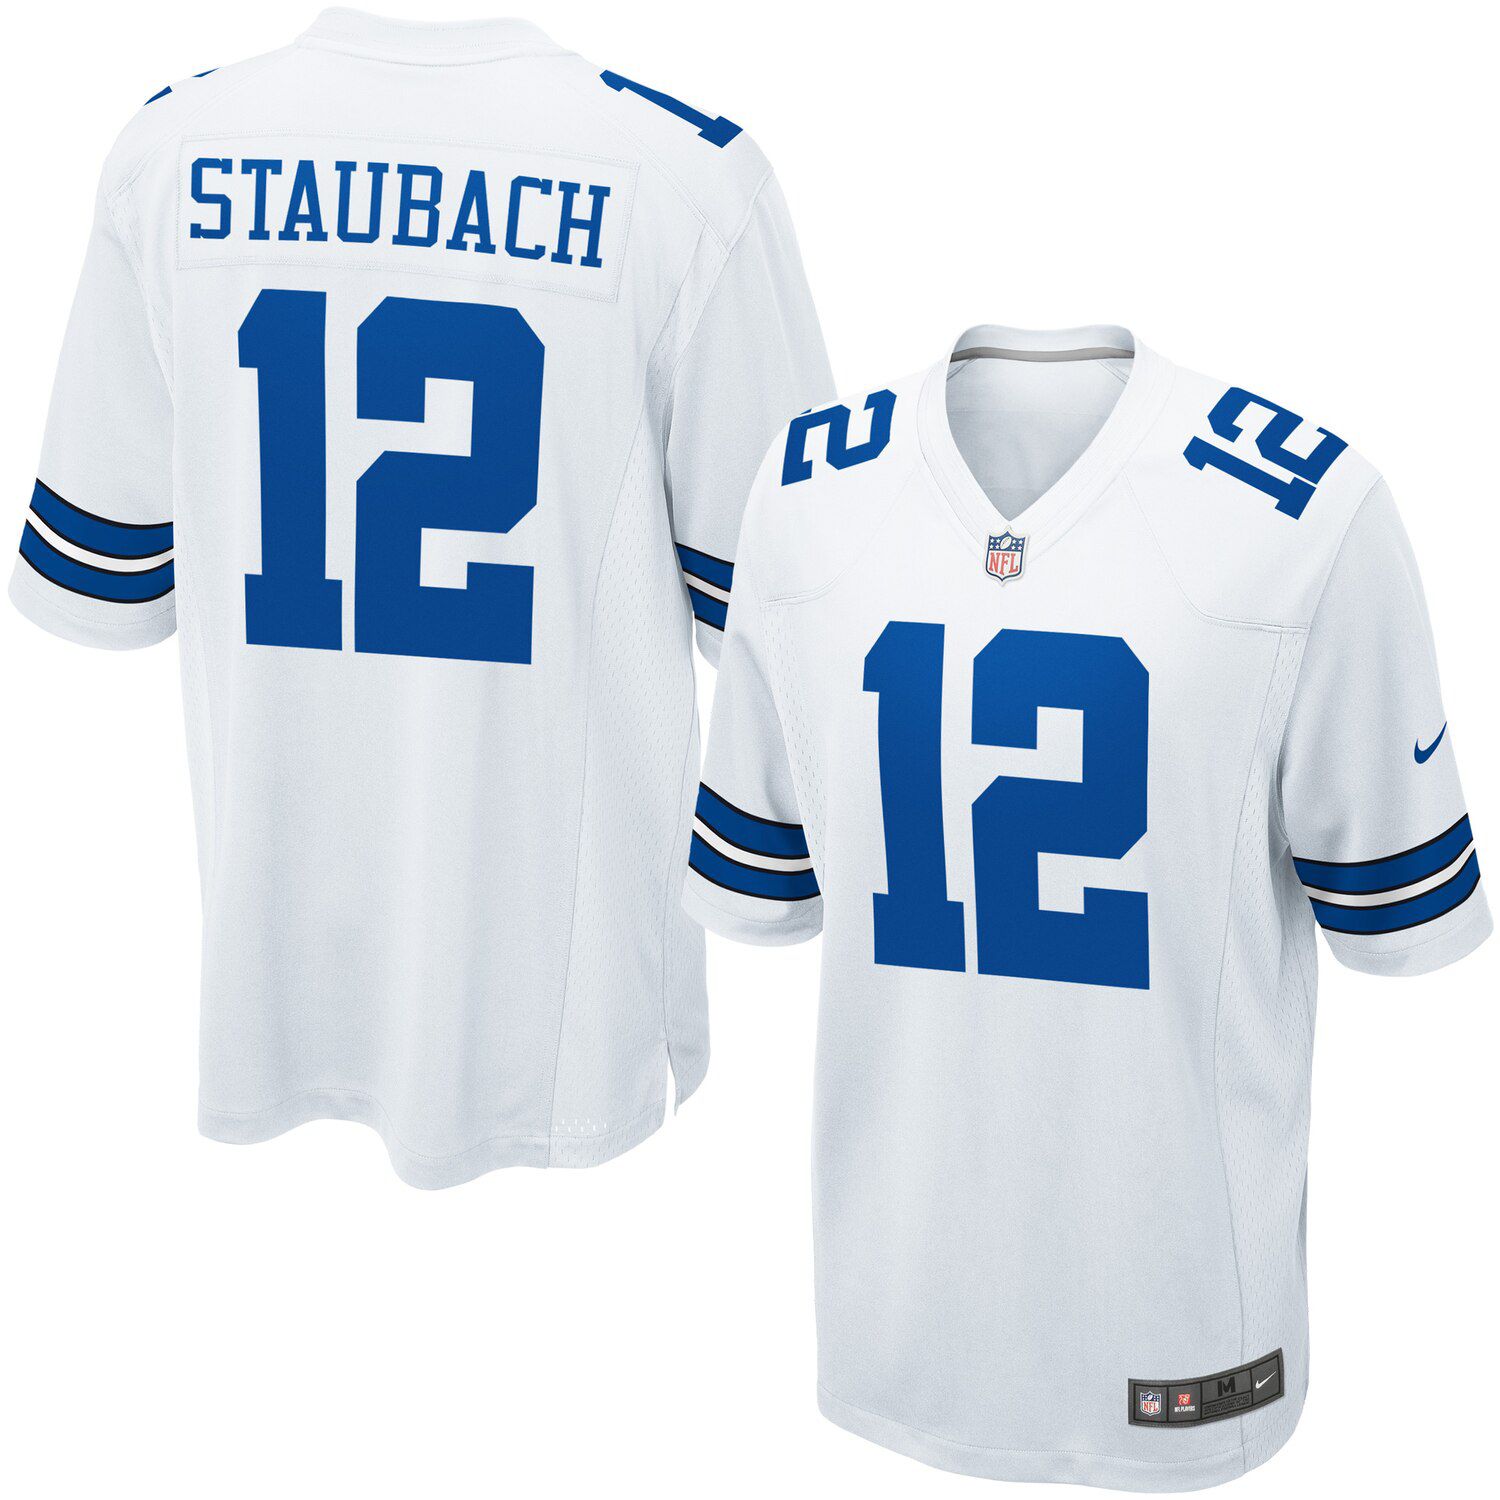 roger staubach jersey for sale